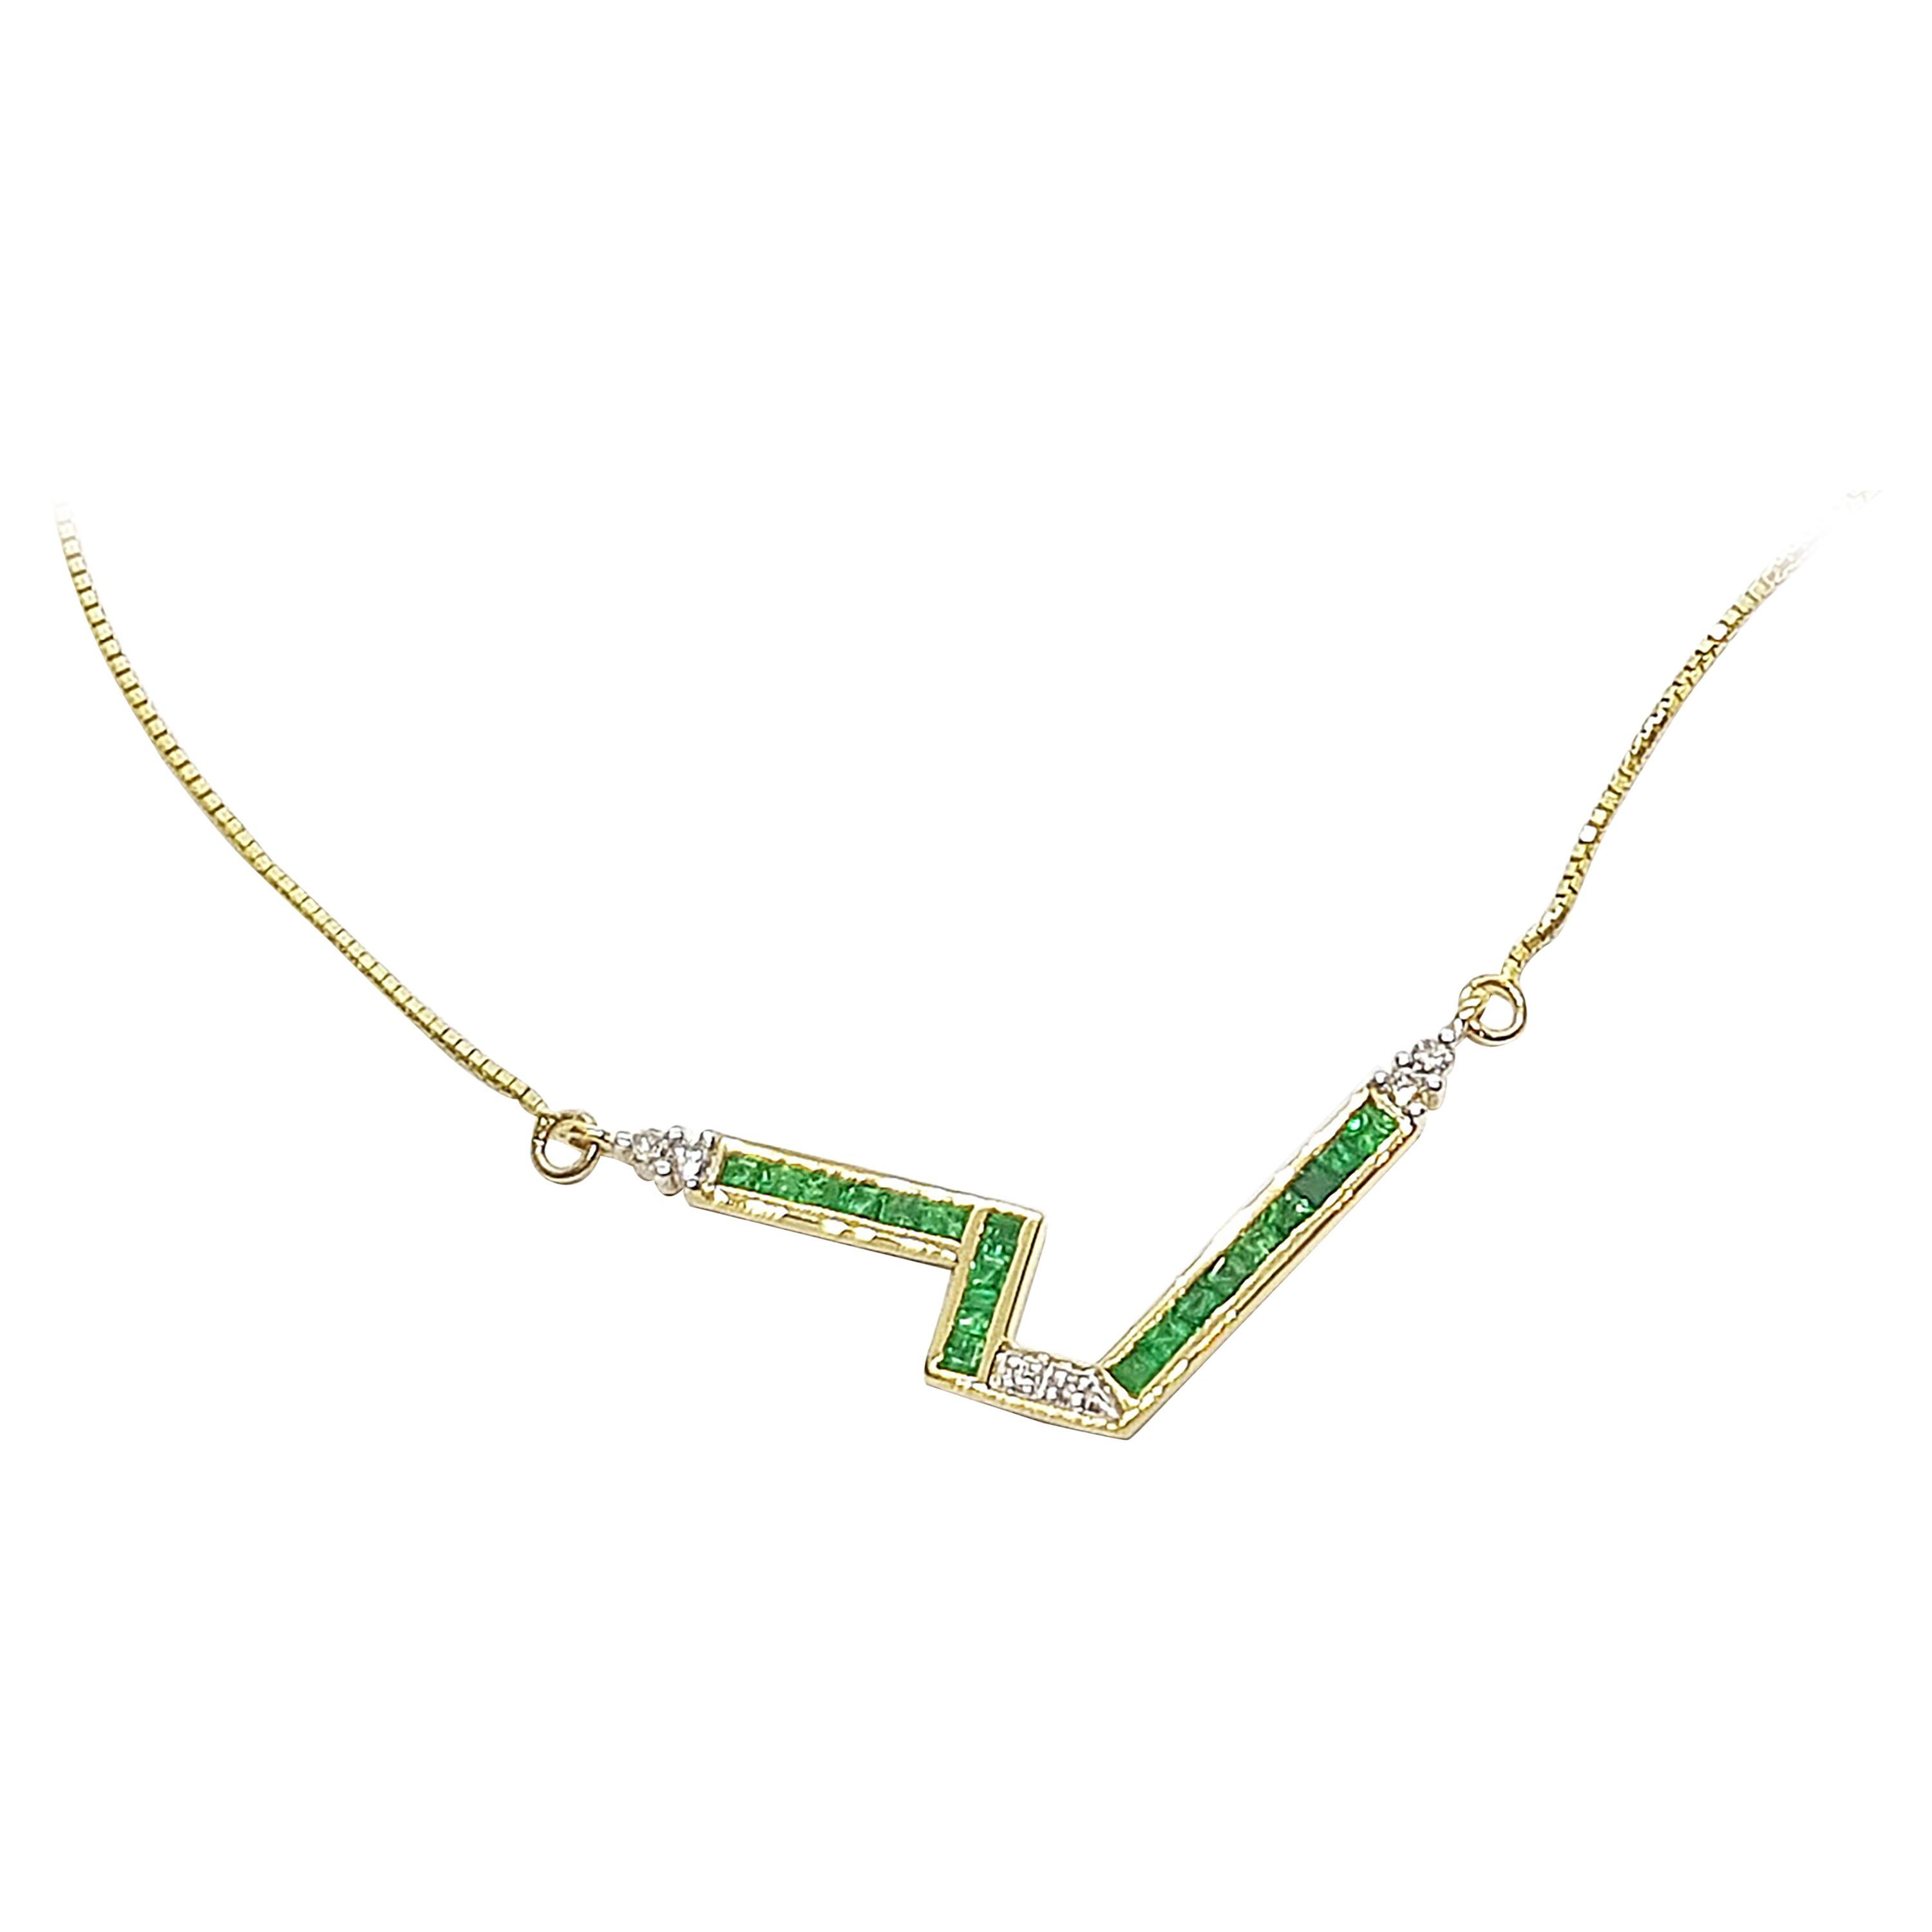 Emerald with Diamond Necklace Set in 18 Karat Gold Setting